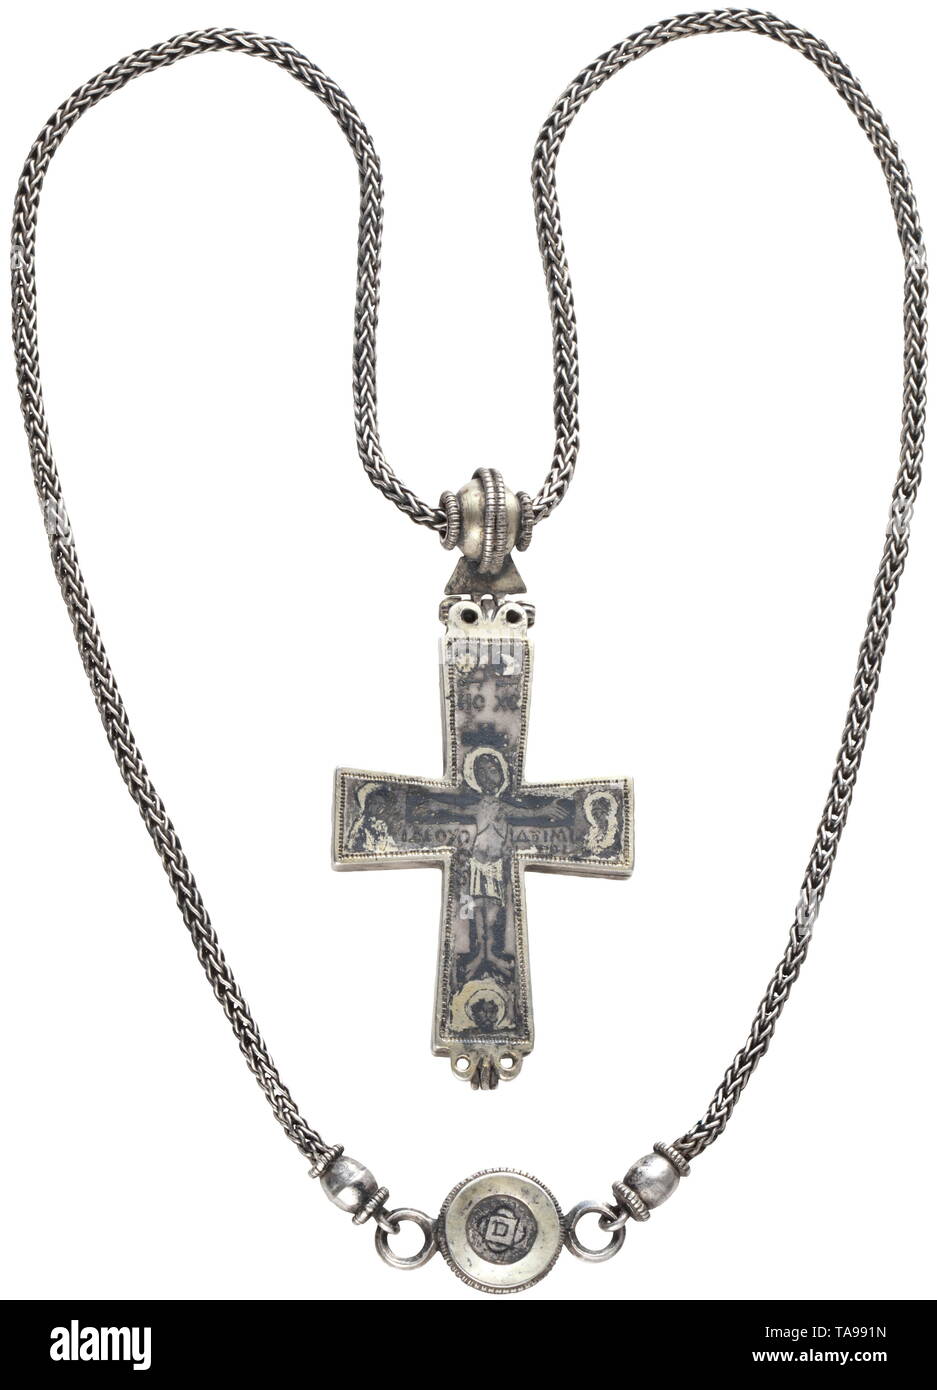 A Middle Byzantine, silver encolpion with necklace, 10th - 11th century Two-piece reliquary cross, hinged at bottom and with movable suspension at top. Biconical pearl with filigree decoration at either side and on the central edge over the triangular hinge plate. Laced through this suspension a massive foxtail necklace of 5 mm diameter. The closure is a medallion with gilt border and side rings, to which the chain ends are connected by barrel shaped beads with filigree borders. The inside surfaces with n middle ages, Additional-Rights-Clearance-Info-Not-Available Stock Photo